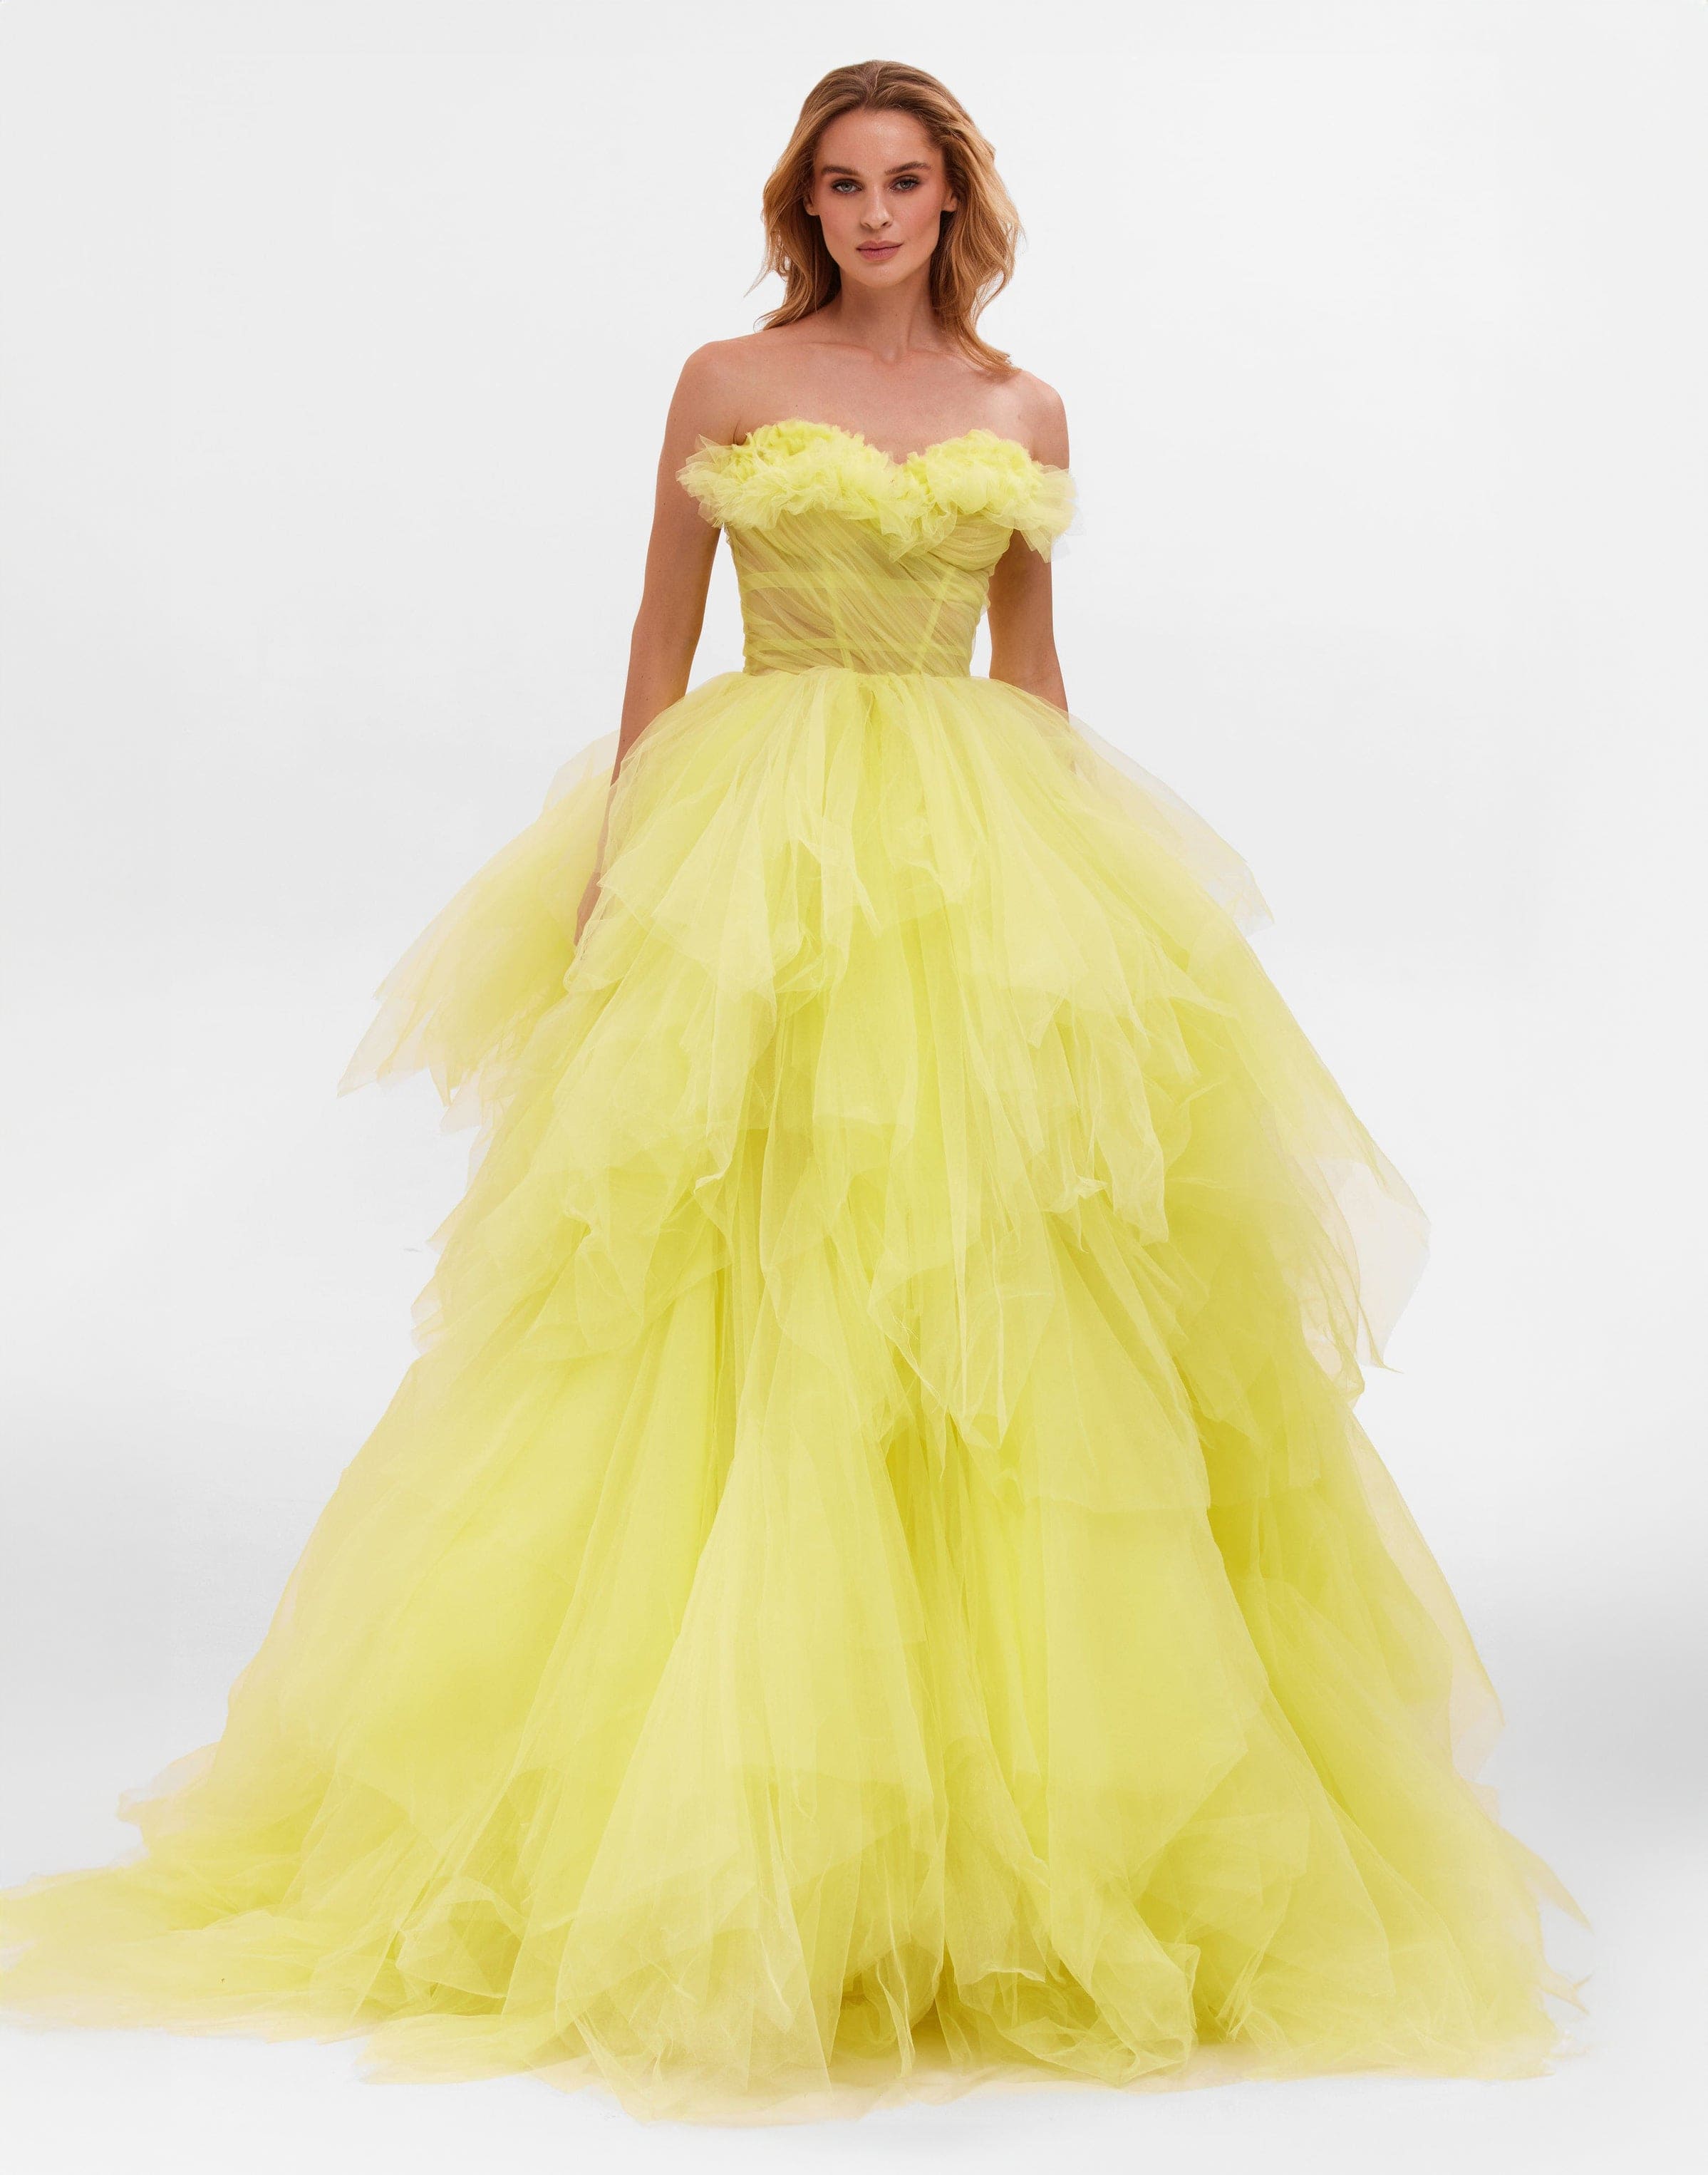 Yellow Strapless High Low Tiered Yellow Evening Gown For Black Girls Custom  Made For African Dubai Photo Shoots, Cocktail Parties, And Special  Occasions From Elegantdress008, $116.79 | DHgate.Com